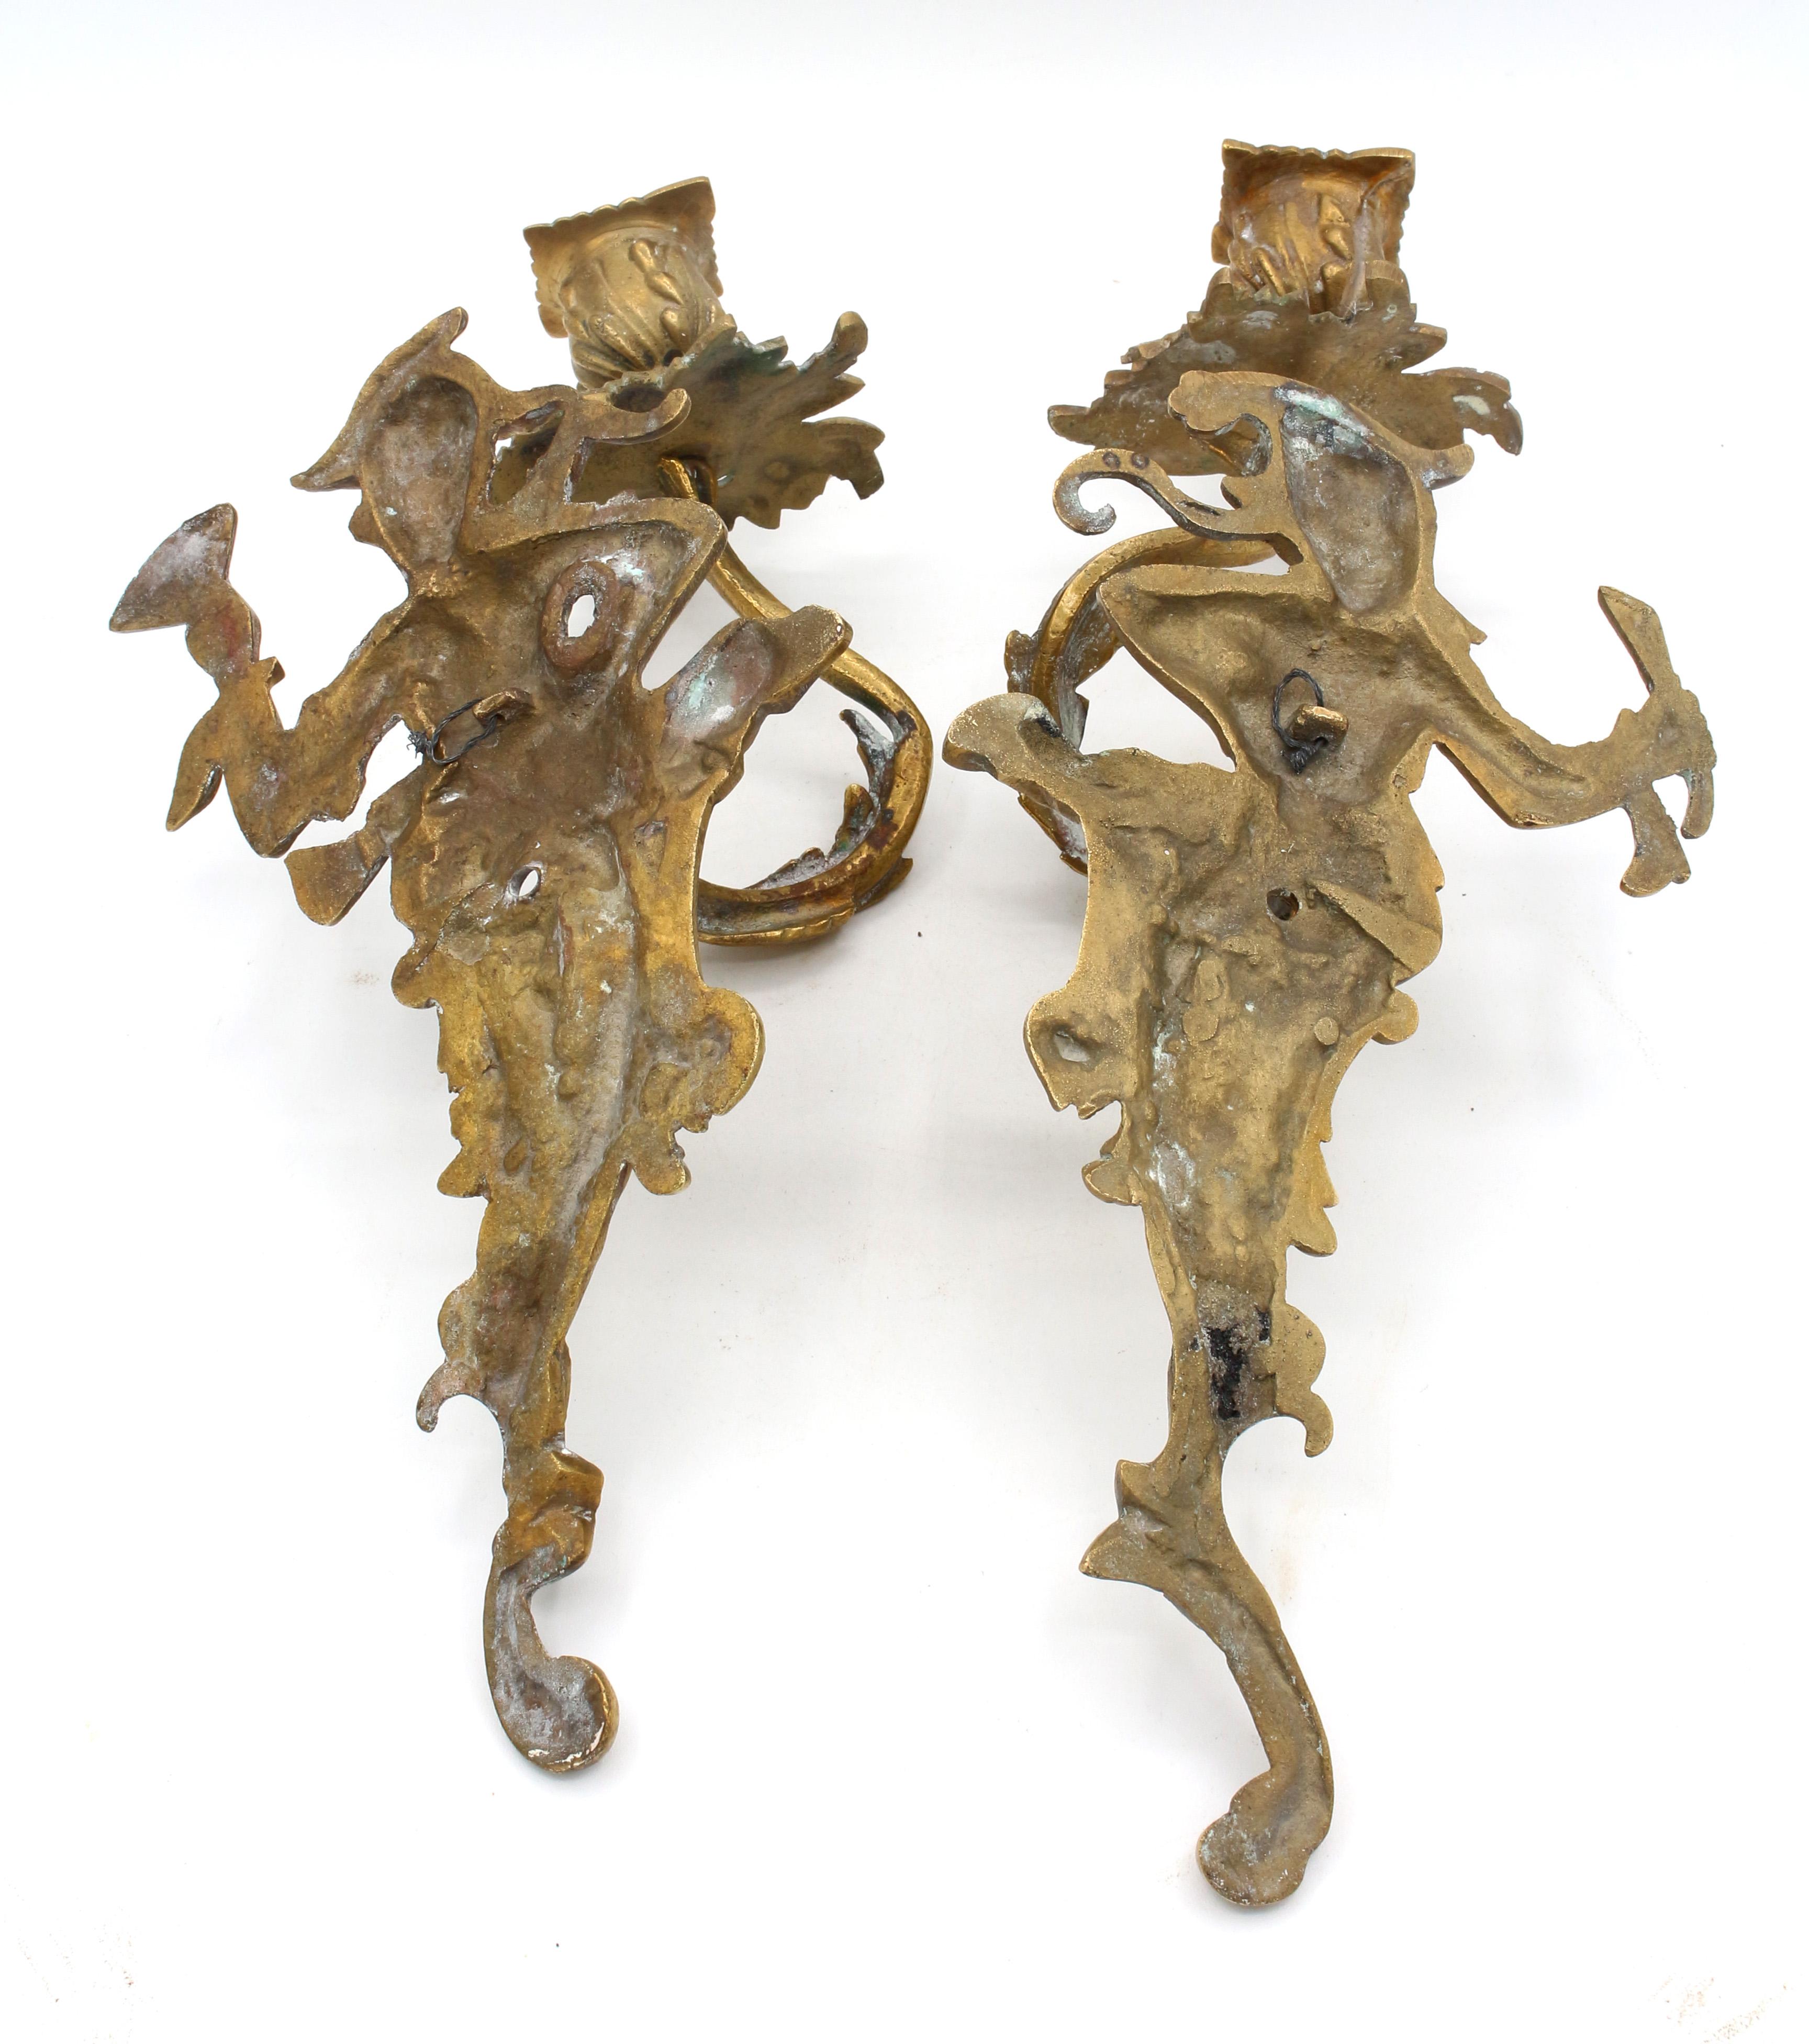 A pair of Chinoiserie cast brass double-light sconces, mid-20th century. Once electrified, not currently wired.
12